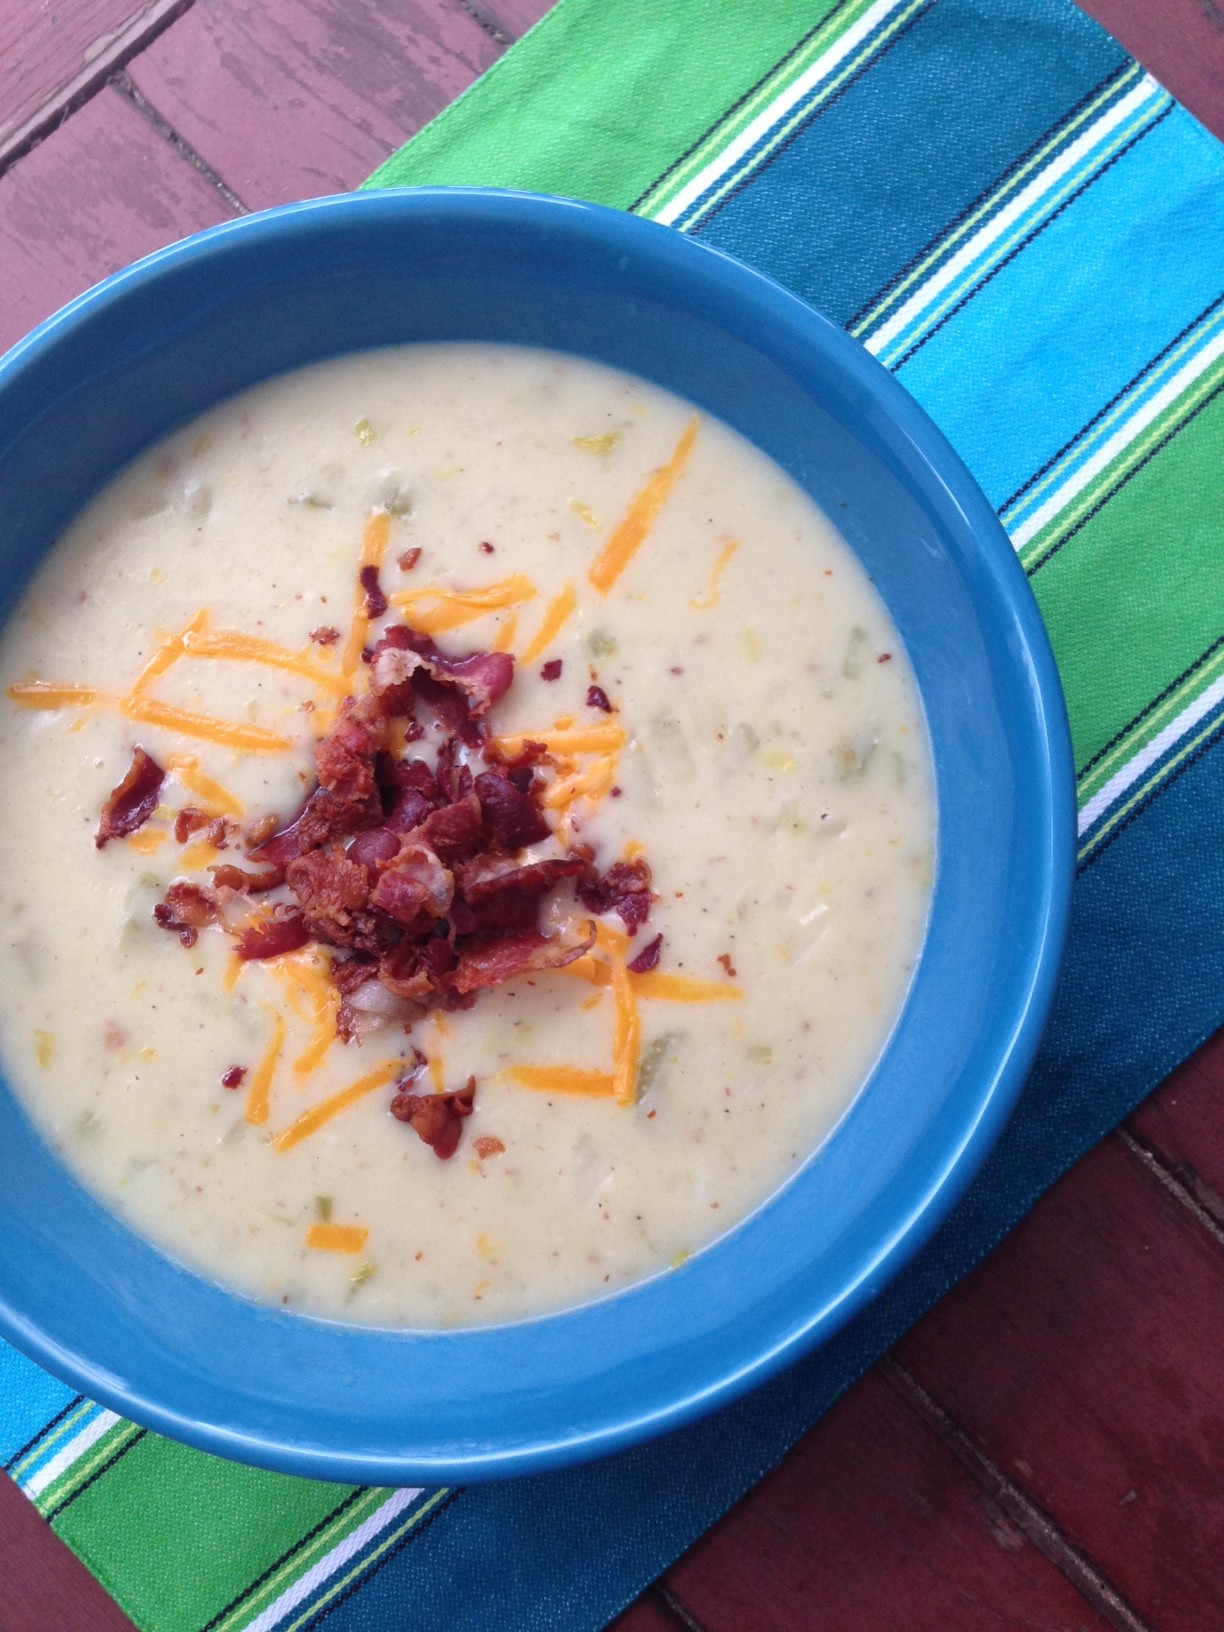 THE Potato Soup with Bacon ⋆ That Which Nourishes